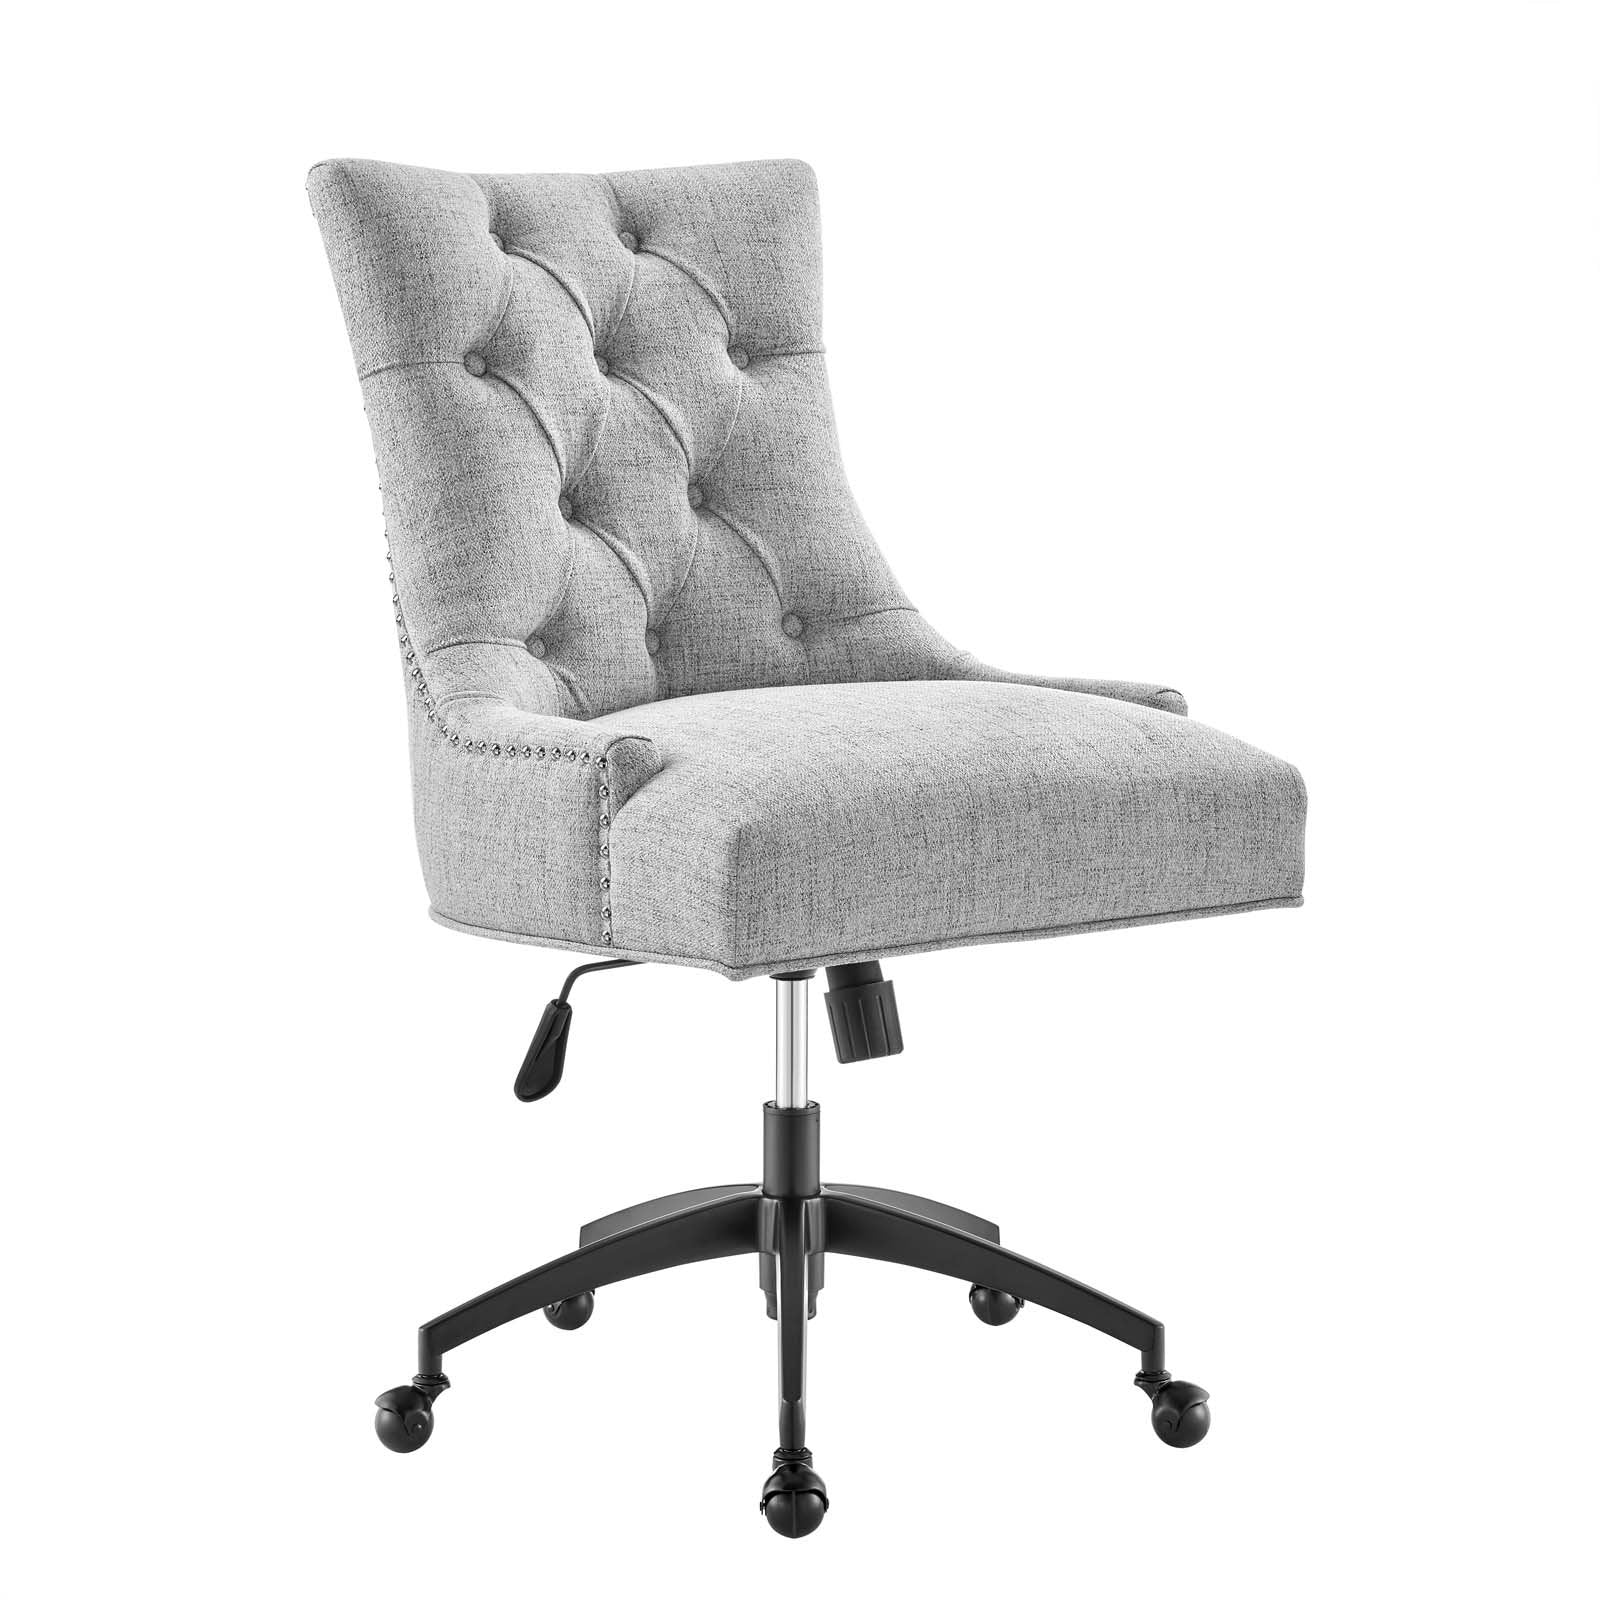 Regent Tufted Fabric Office Chair